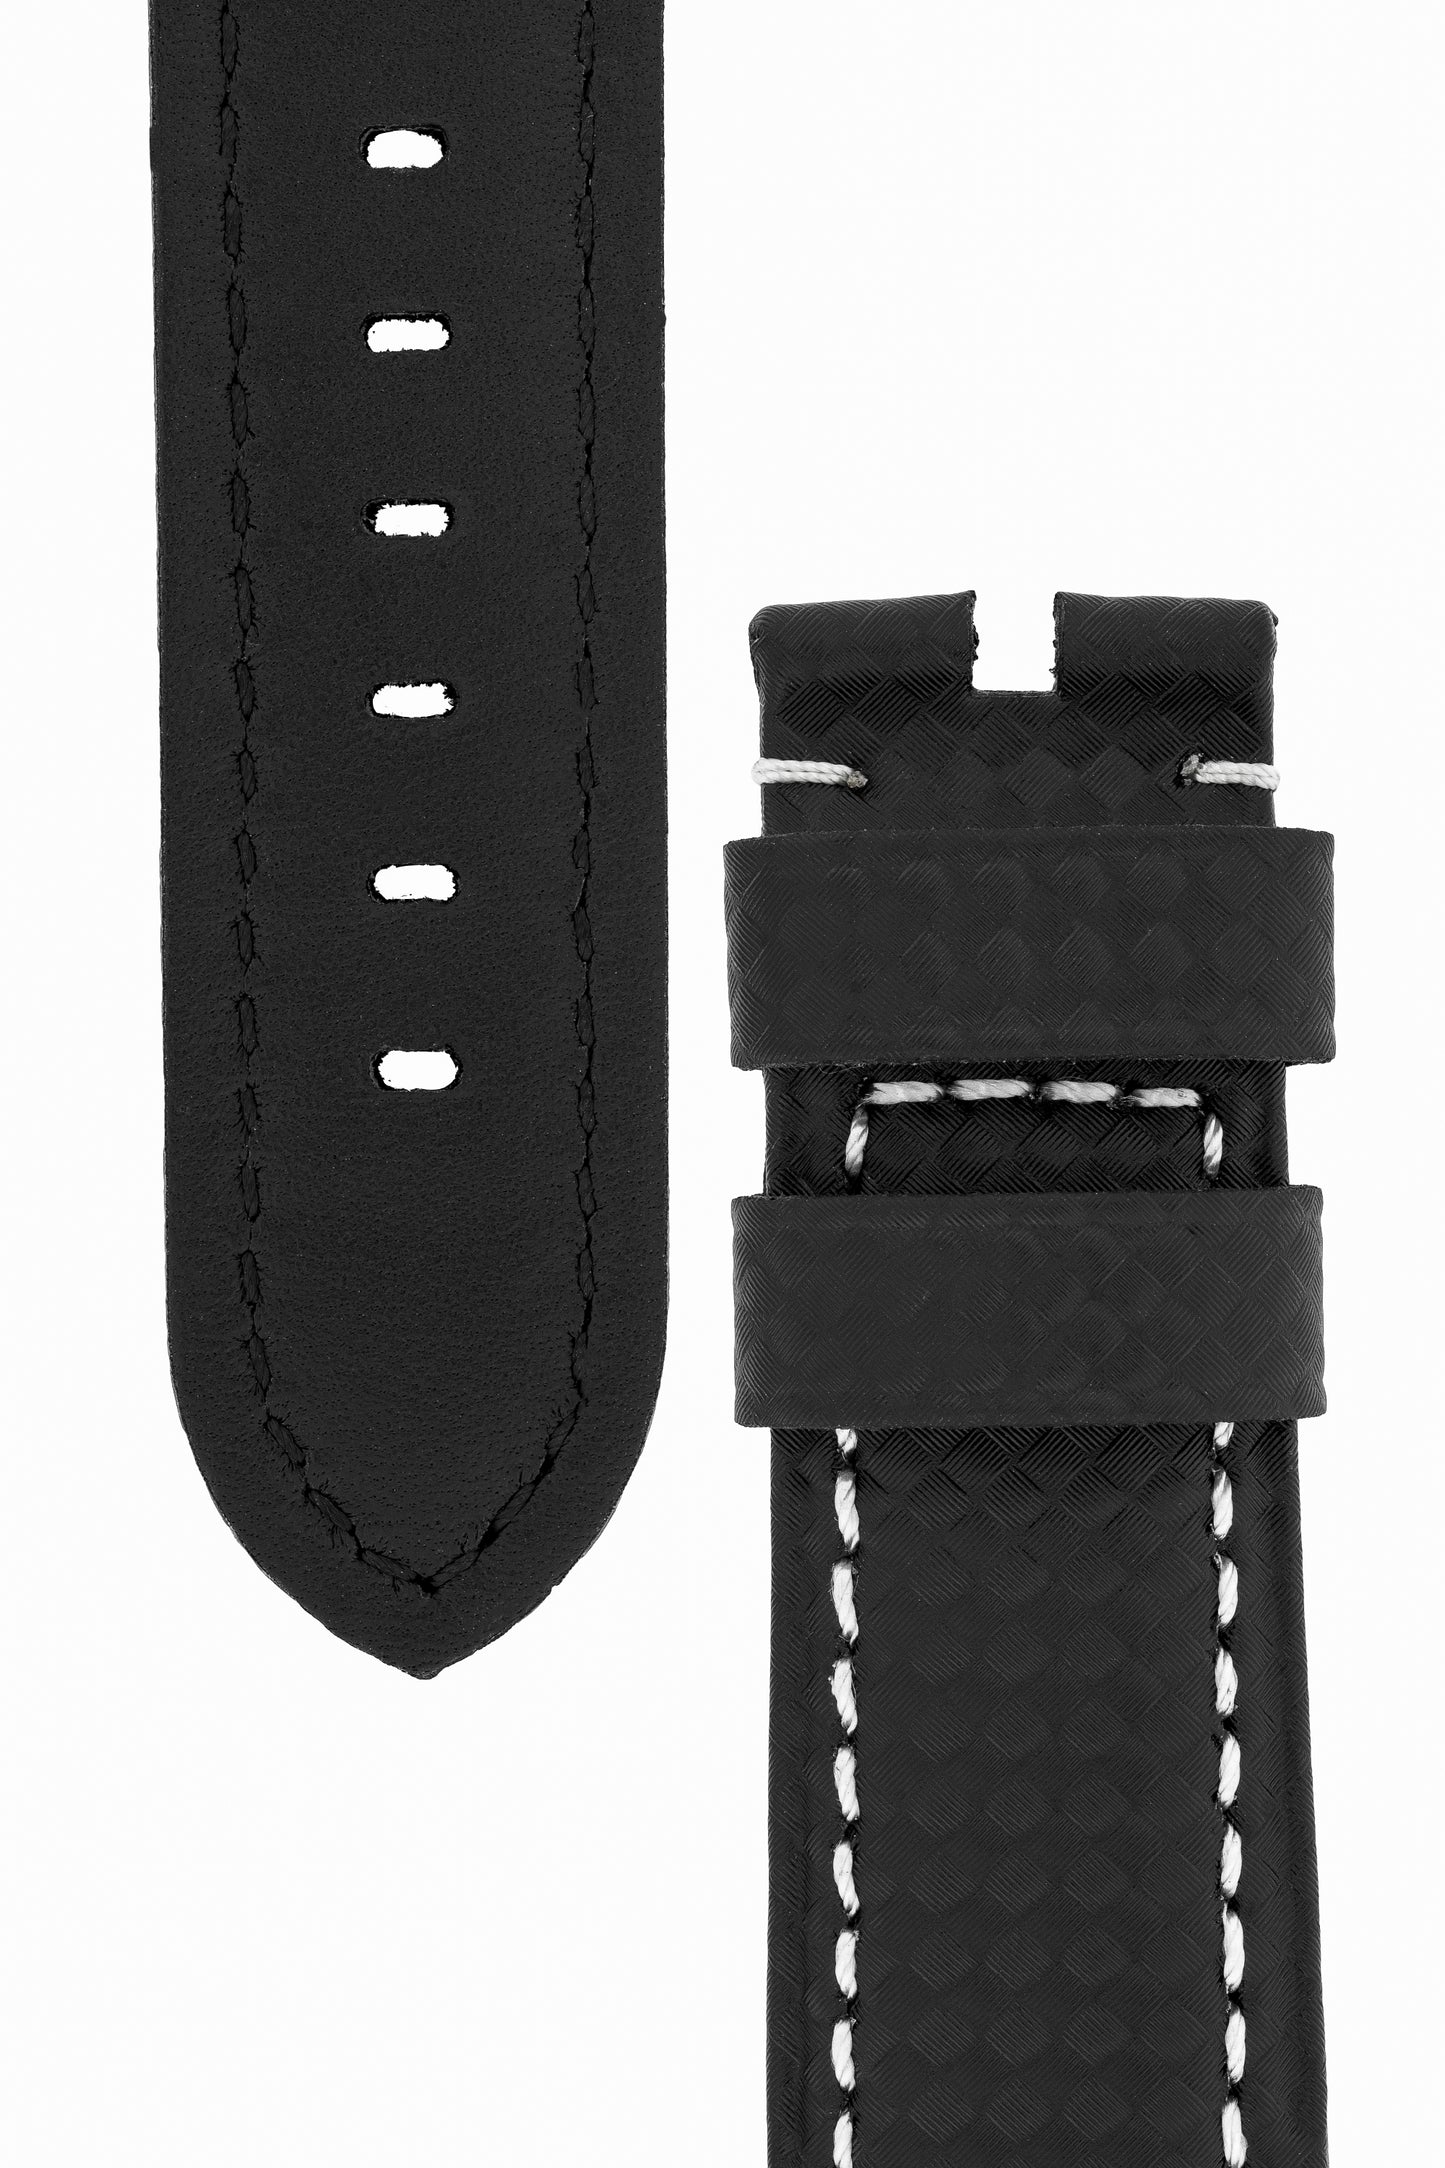 Panerai Style Carbon Leather Watch Strap in BLACK | WatchObsession